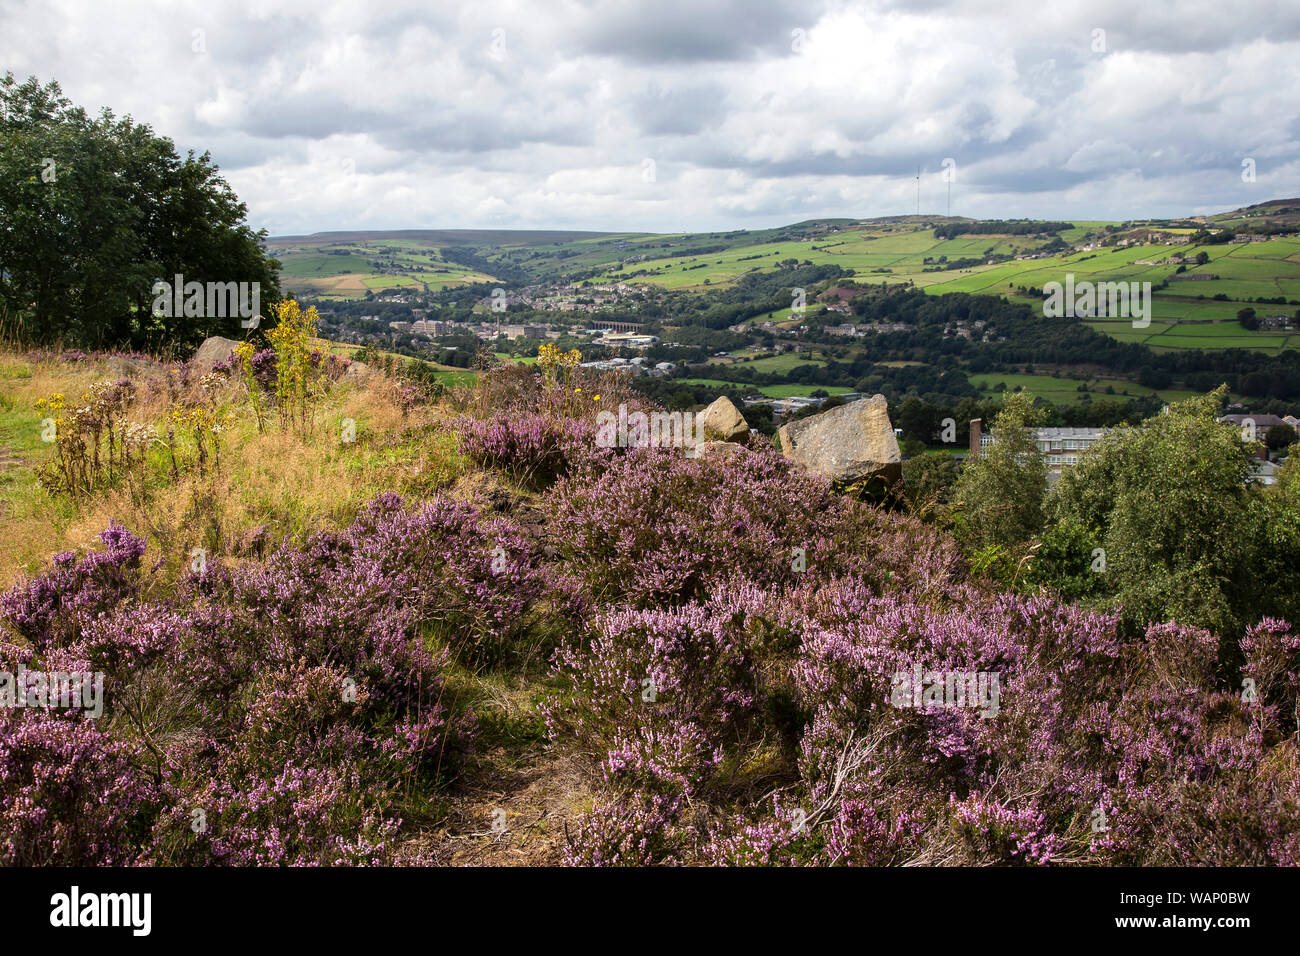 Elevated view looking towards Slaithwaite in the Colne Valley, West Yorkshire from Crosland Heath where the heather is in full bloom in late summer Stock Photo